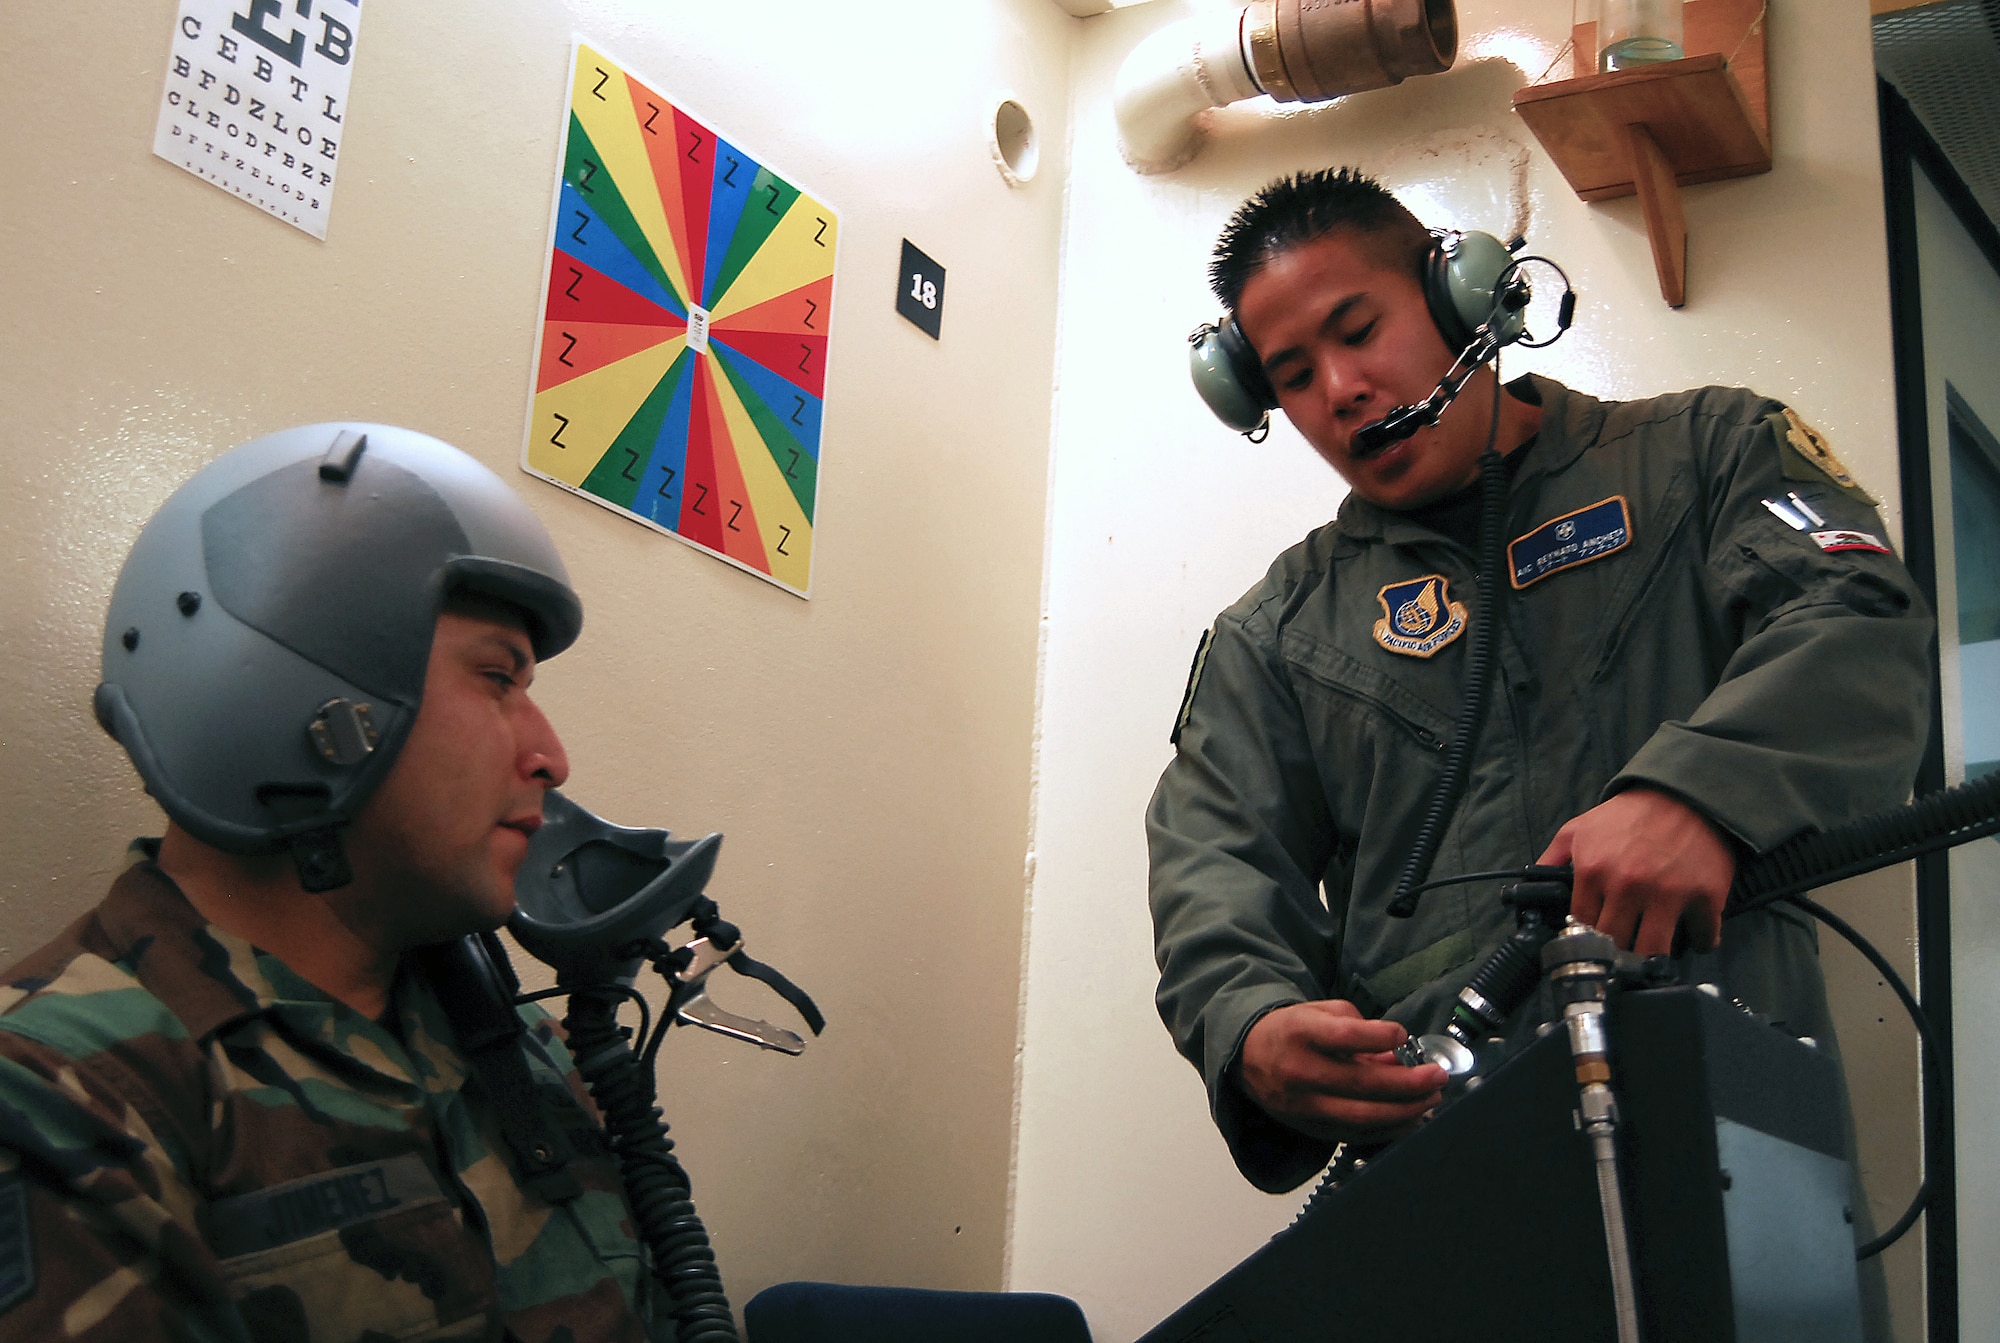 Airman 1st Class Reynato Ancheta demonstrates to Staff Sgt. Pedro Jimenez how to connect the mask breathing unit into the altitude chamber's oxygen supply Aug. 28, 2007, Kadena Air Base, Japan.  The mission of the altitude chamber is to teach military personnel who fly in aircraft, to identify, recognize and treat symptoms of hypoxia.  Airman Ancheta is an instructor for the Physiological Training Flight, 18th Aerospace Medicine Squadron.  Sergeant Jimenez is assigned to 36th Wing Public Affairs .  U.S. Air Force photo/Airman 1st Class Kelly Timney